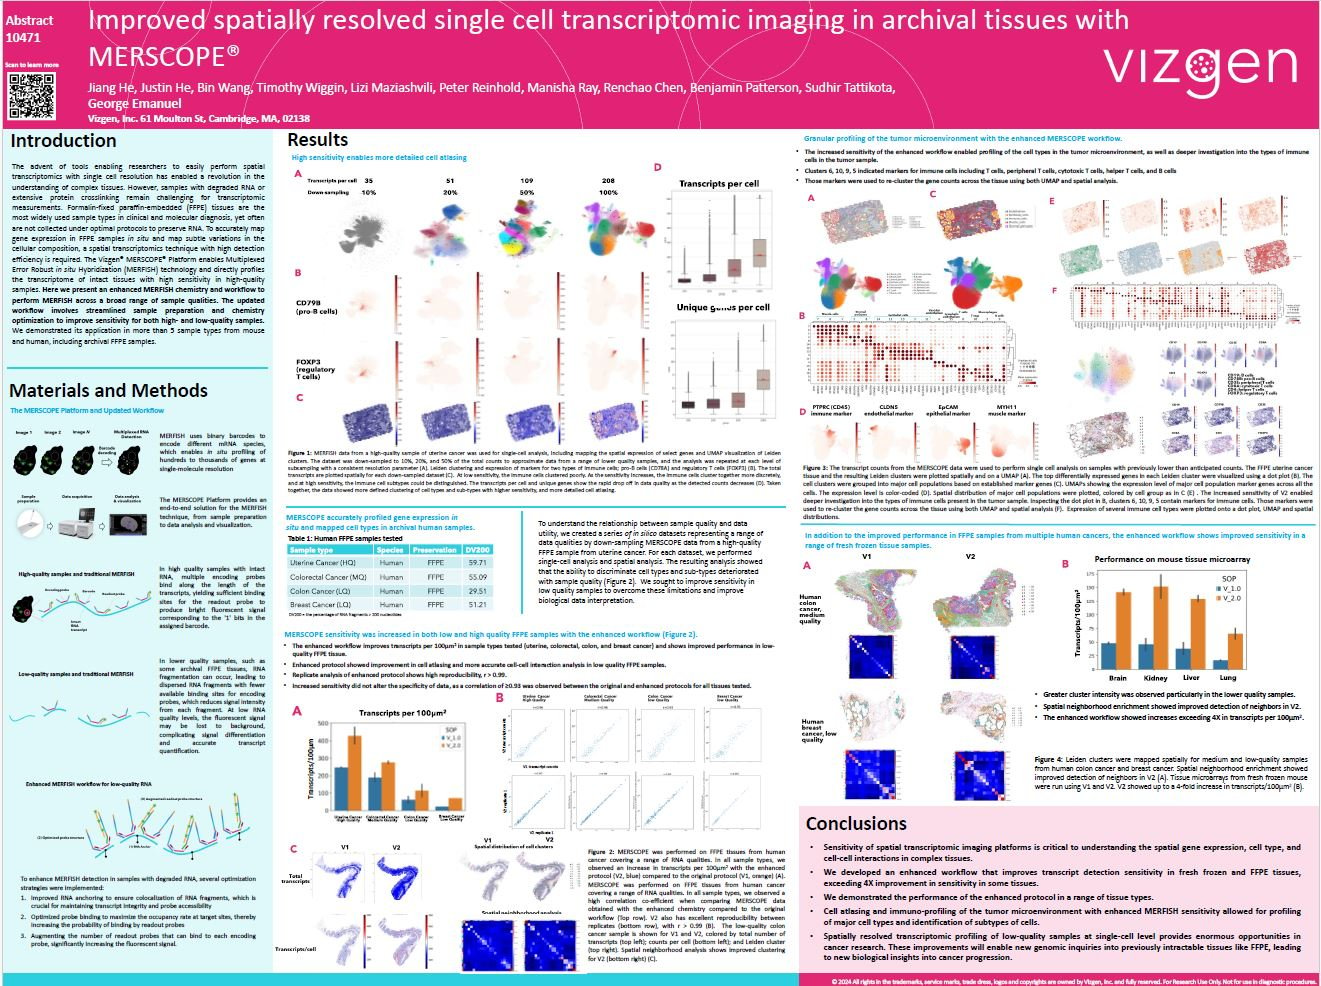 AACR Poster Snapshot